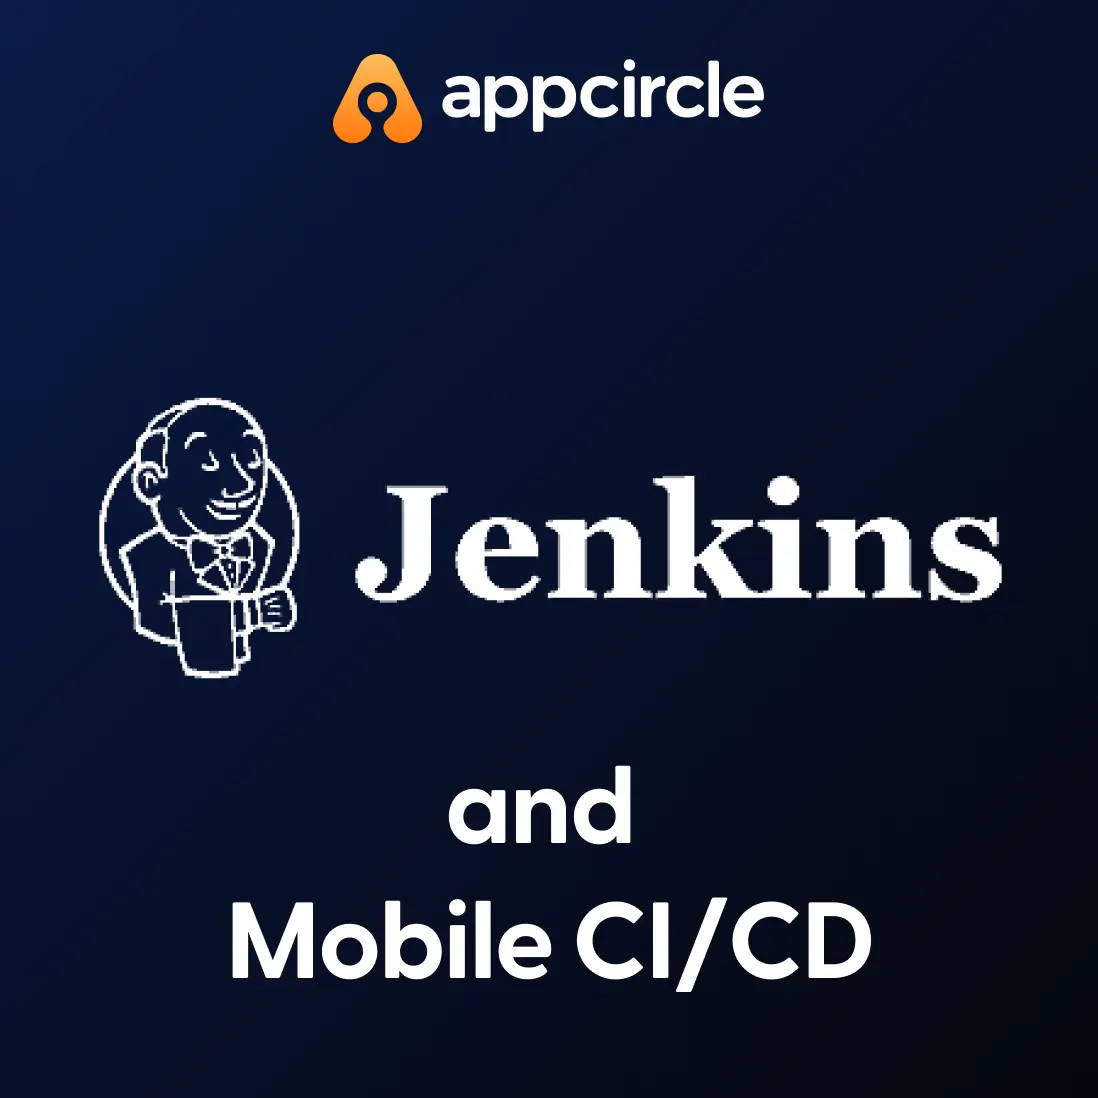 Why do you need a dedicated CI/CD Platform instead of Using Jenkins for Mobile Apps?